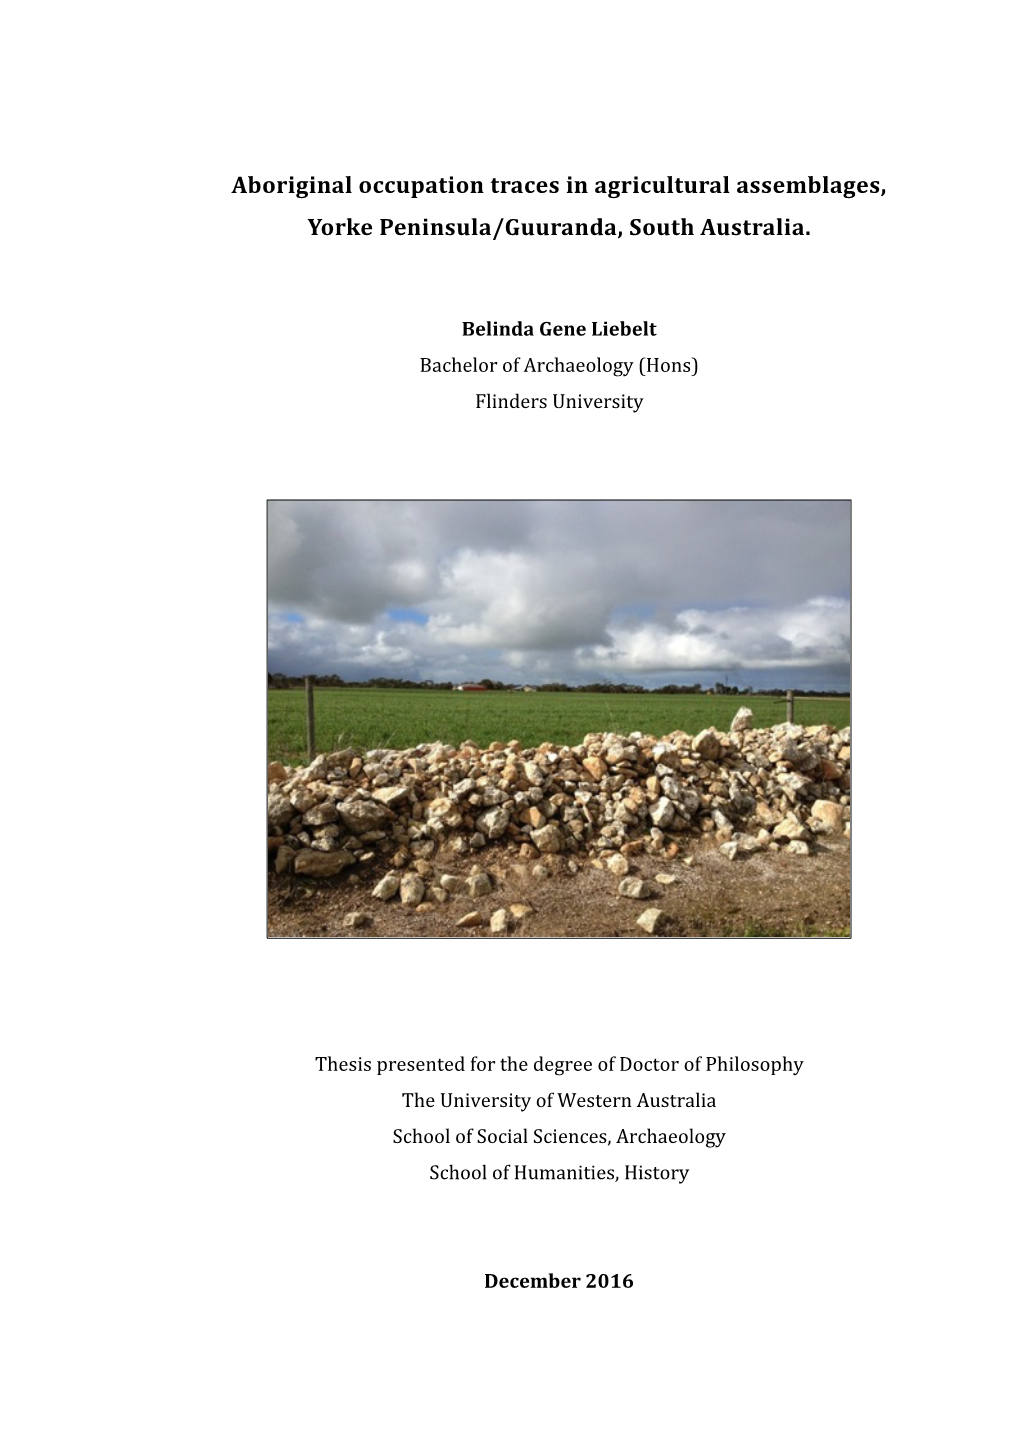 Aboriginal Occupation Traces in Agricultural Assemblages, Yorke Peninsula/Guuranda, South Australia